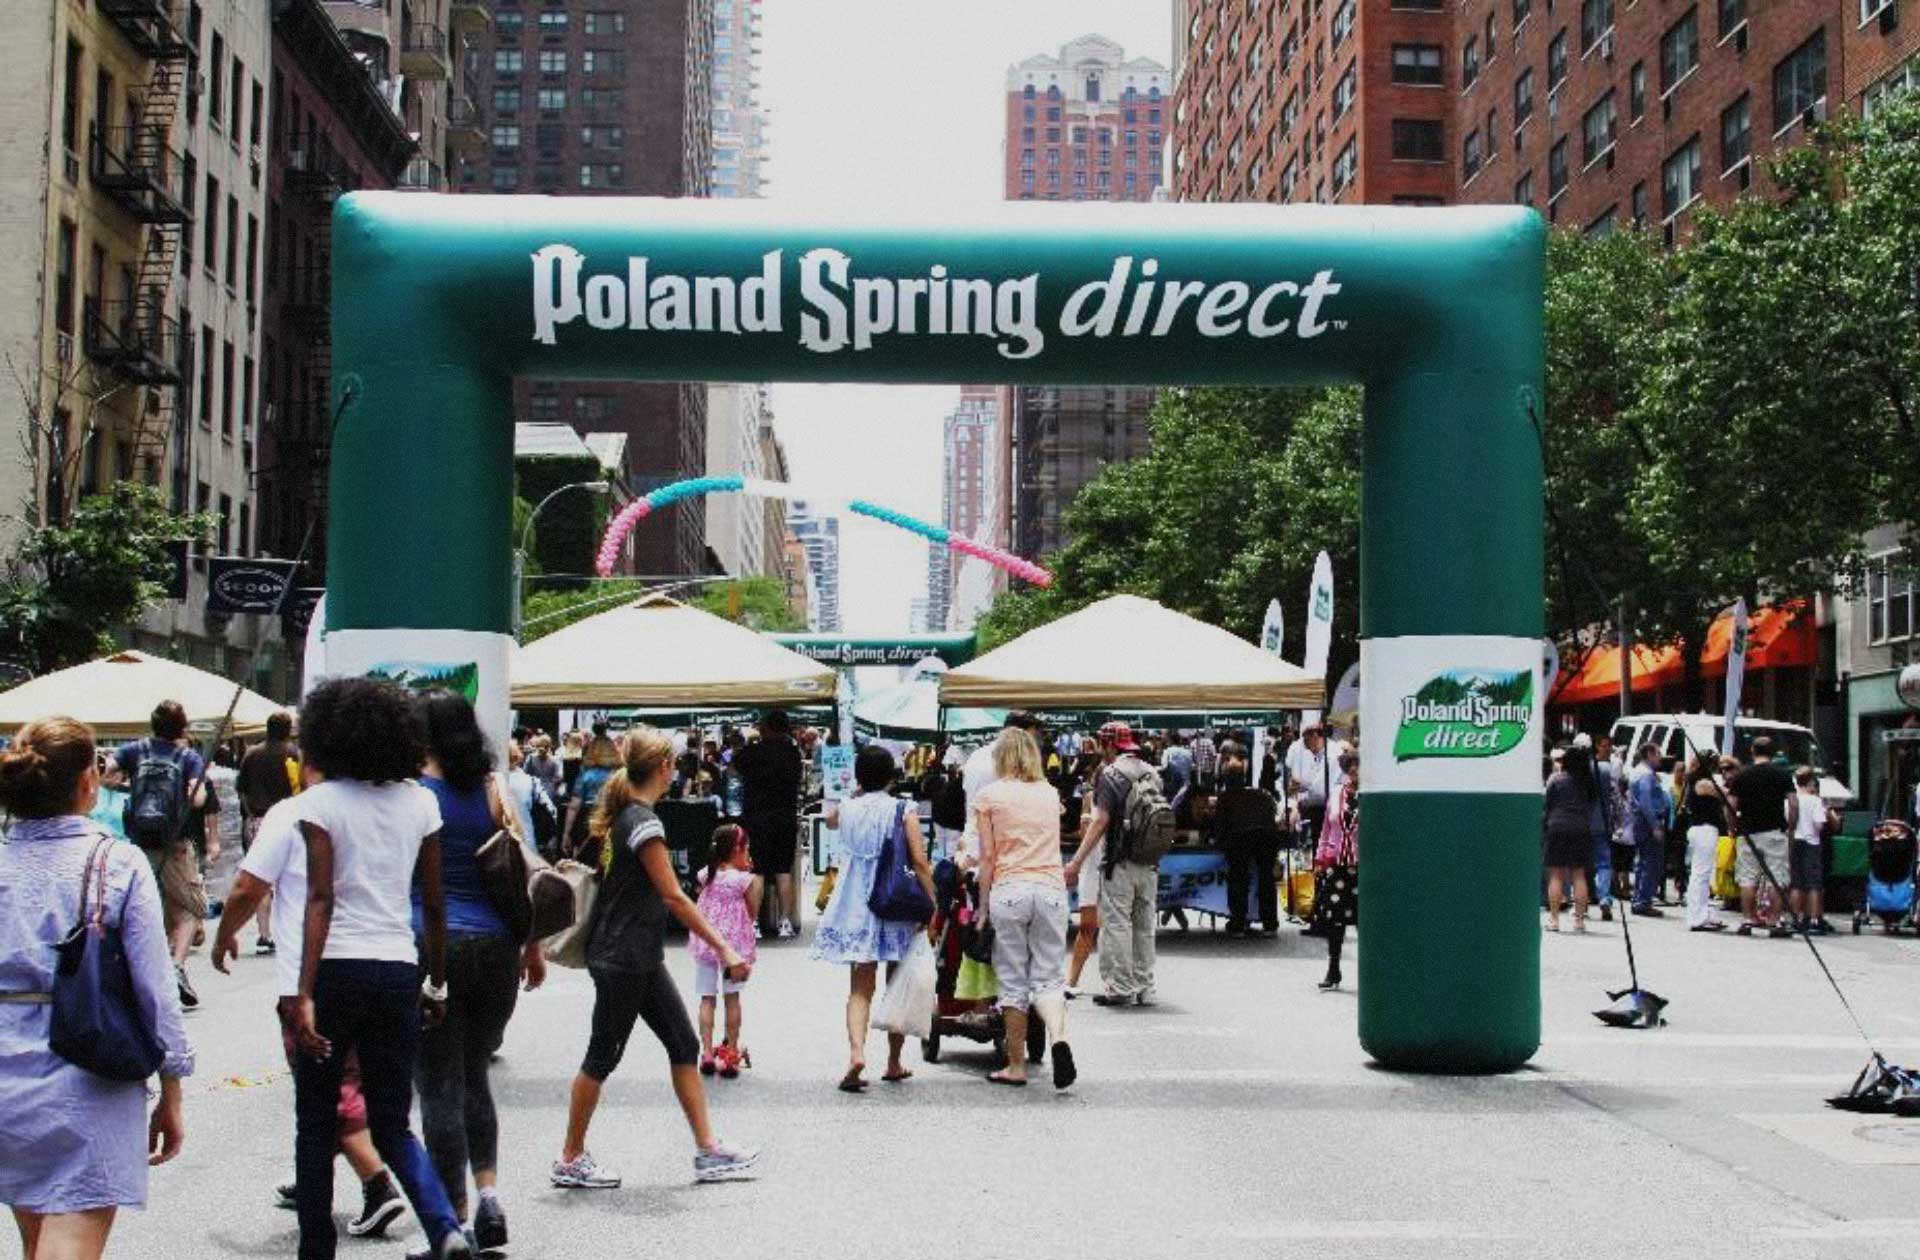   Reach Your Target  Size Matters   Find Out How We Helped Poland Springs  